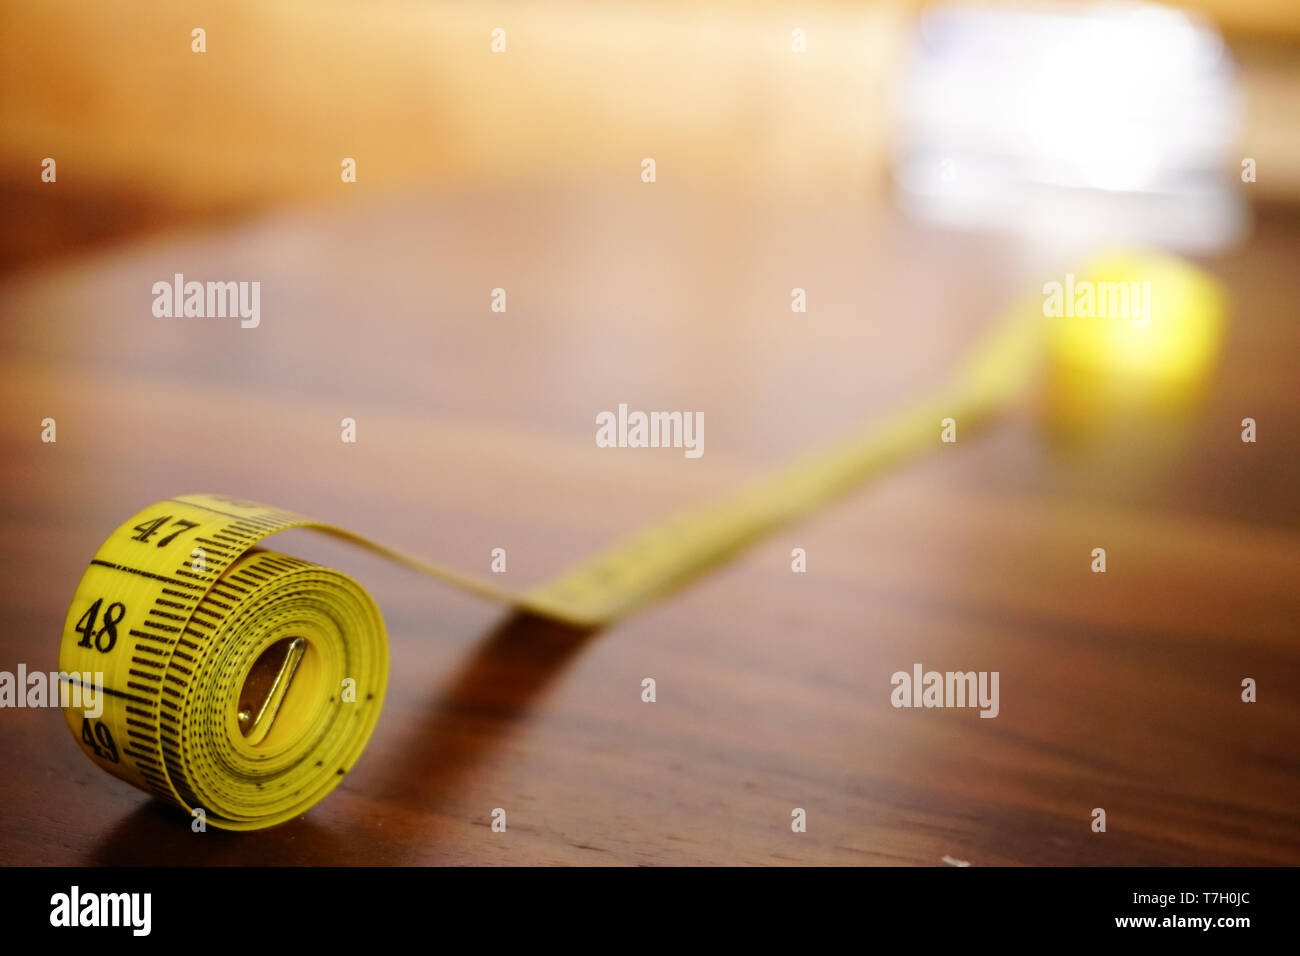 Rolled measuring tape close up view Stock Photo